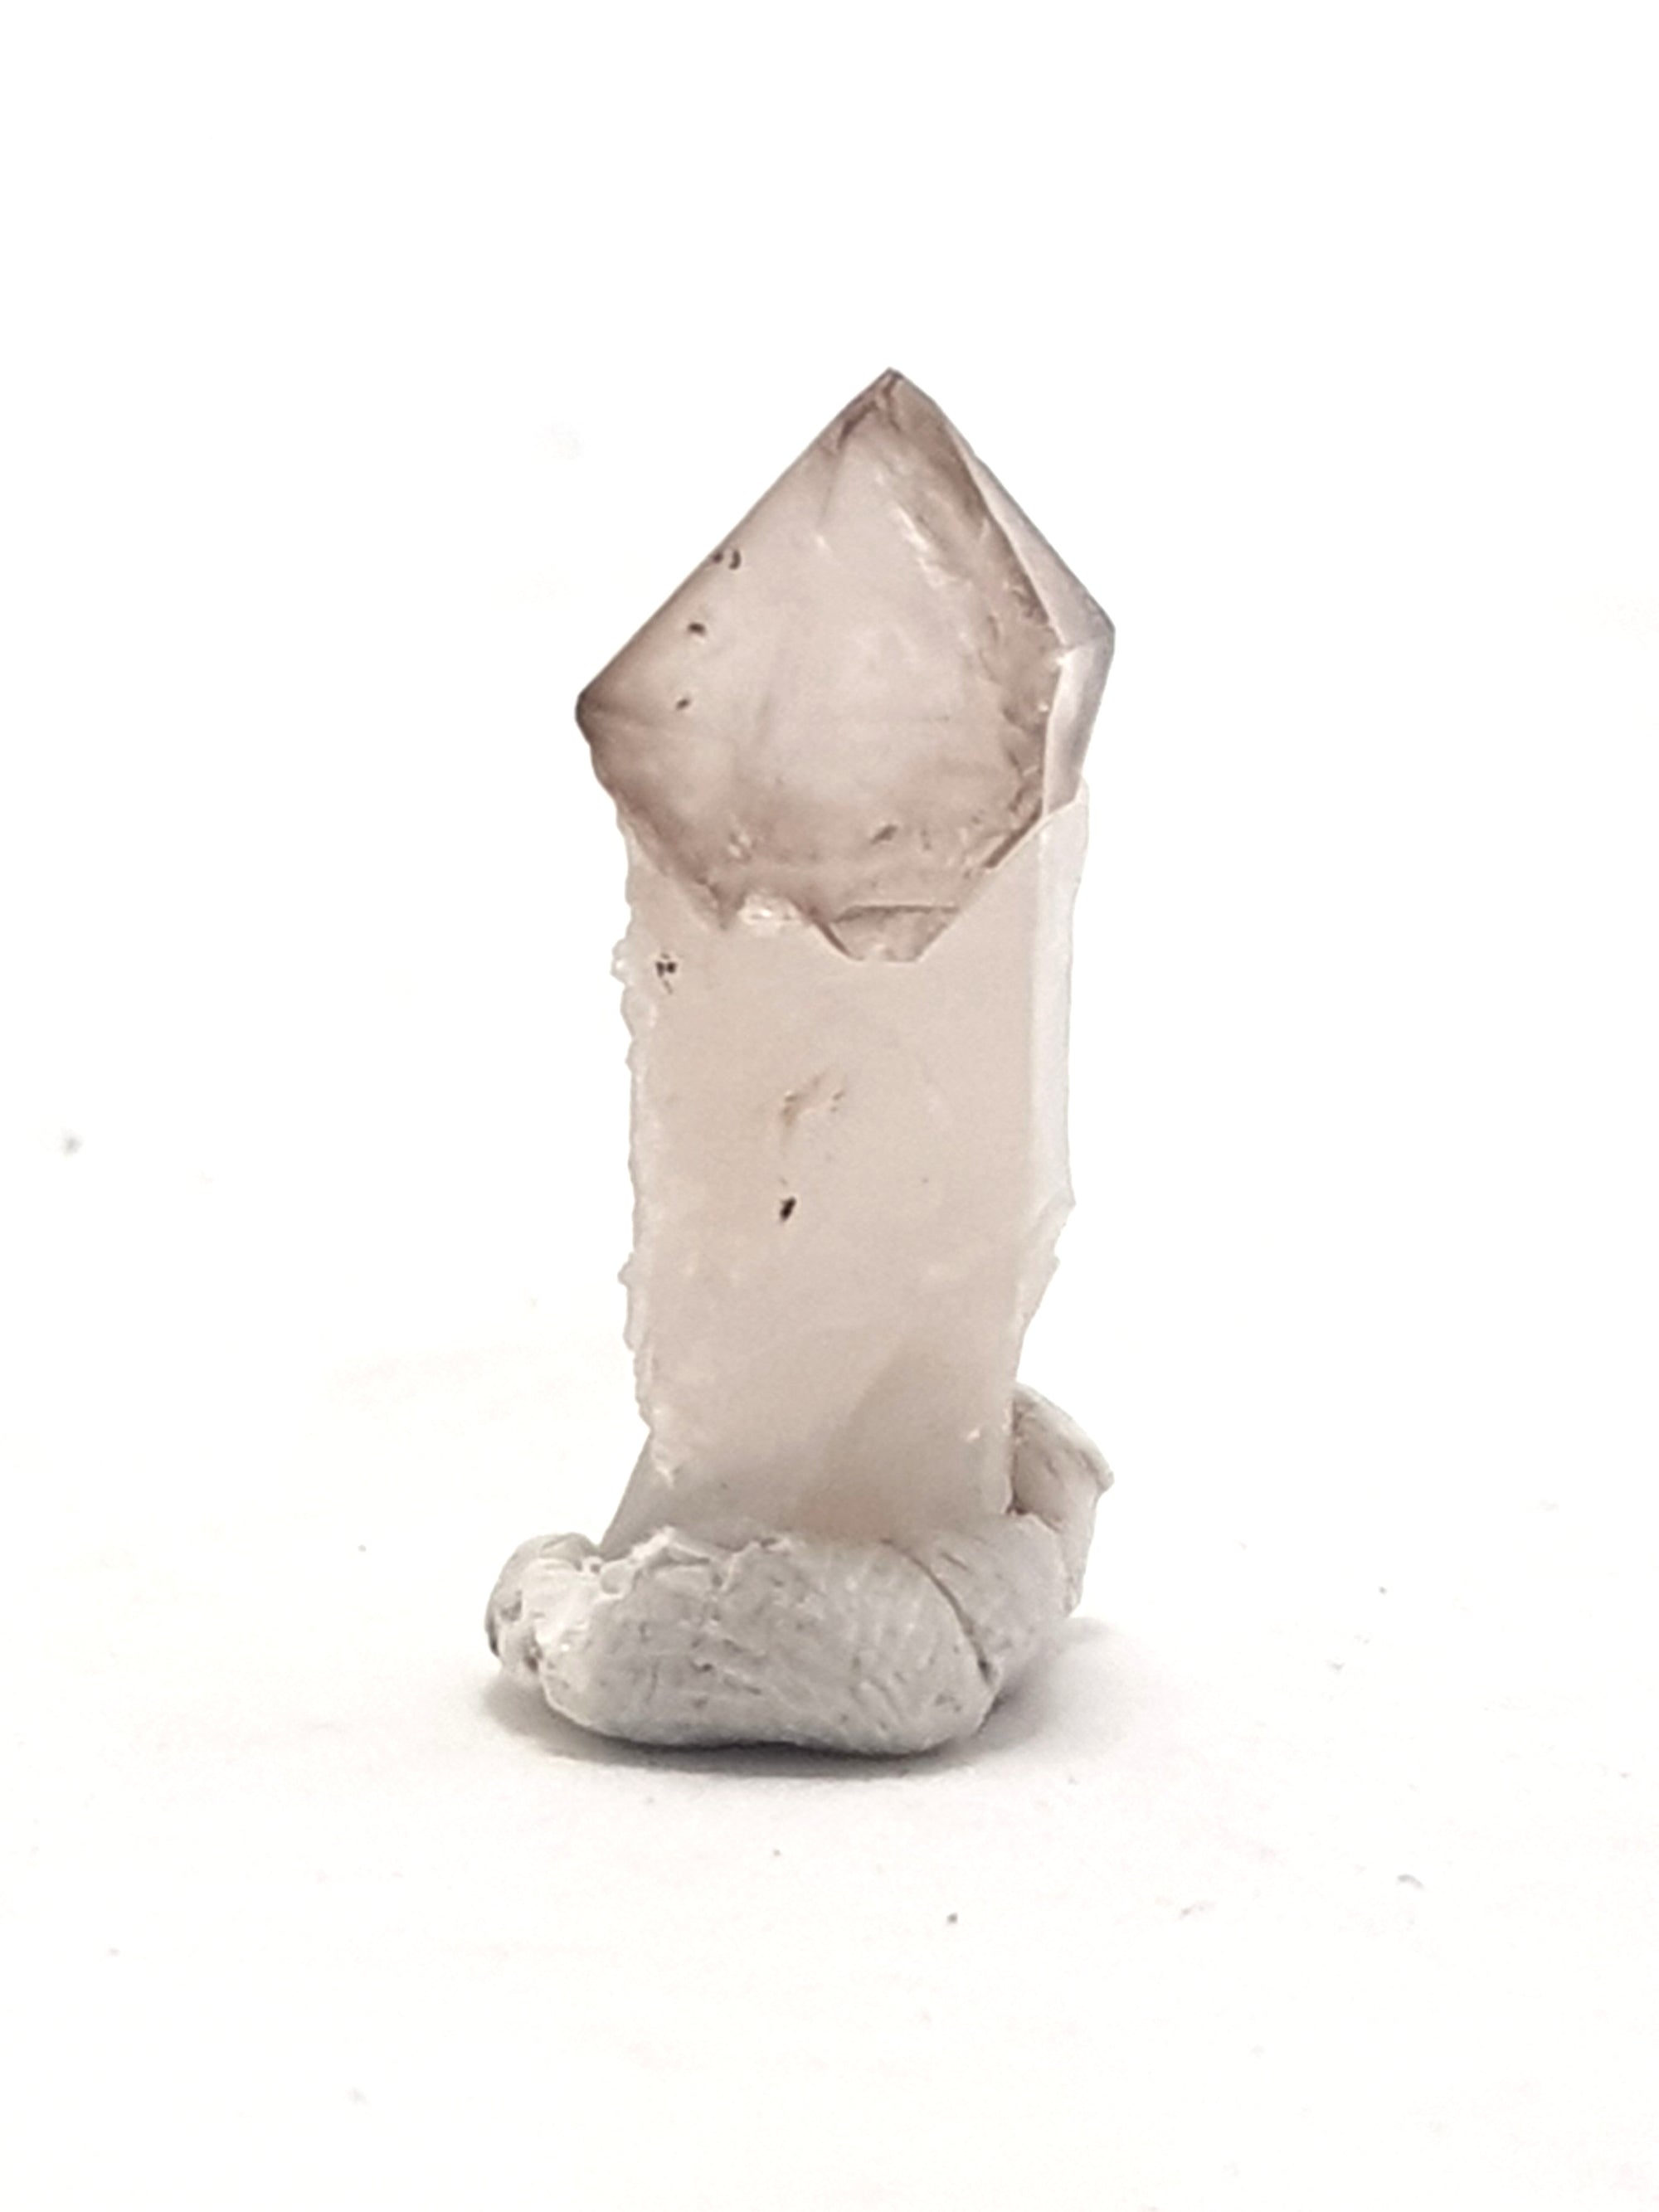 amethyst sceptre micromount. This is a double terminated amethyst crystal on top of a well formed white quartz point